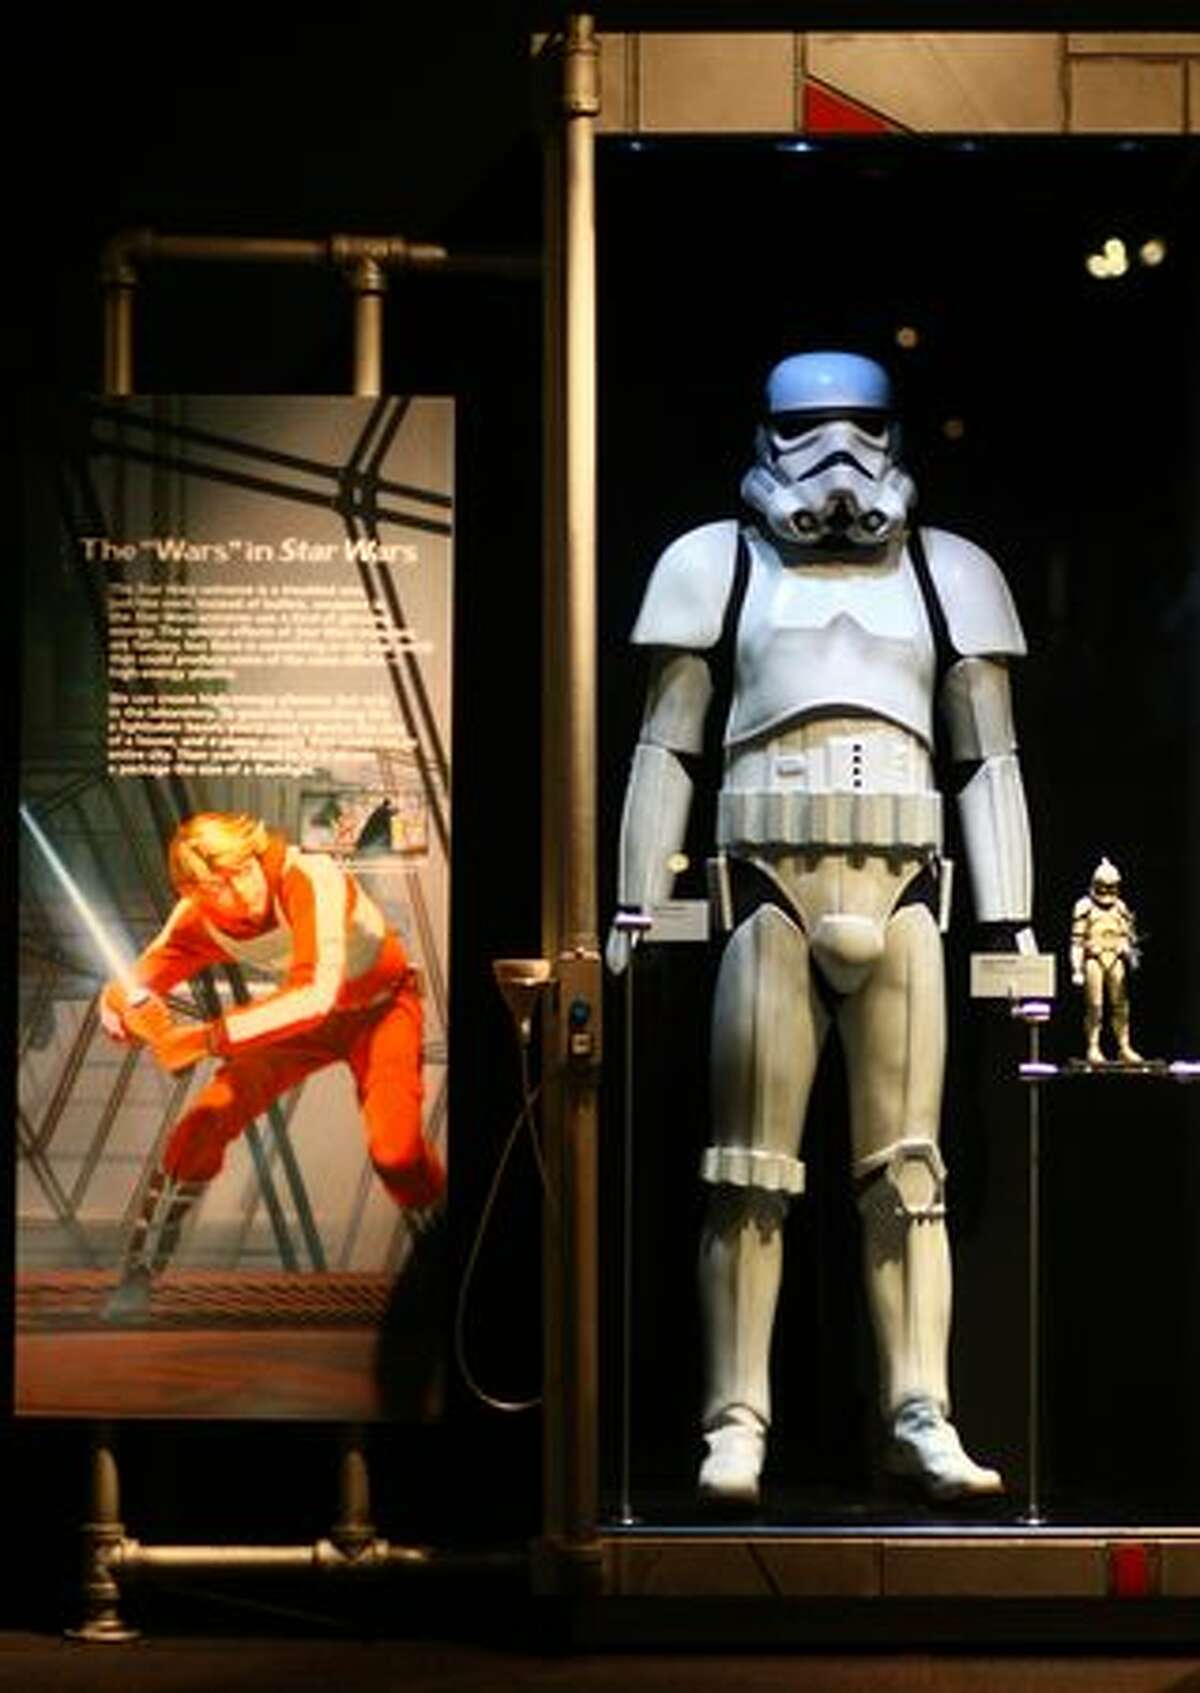 Star Wars exhibit at Pacific Science Center